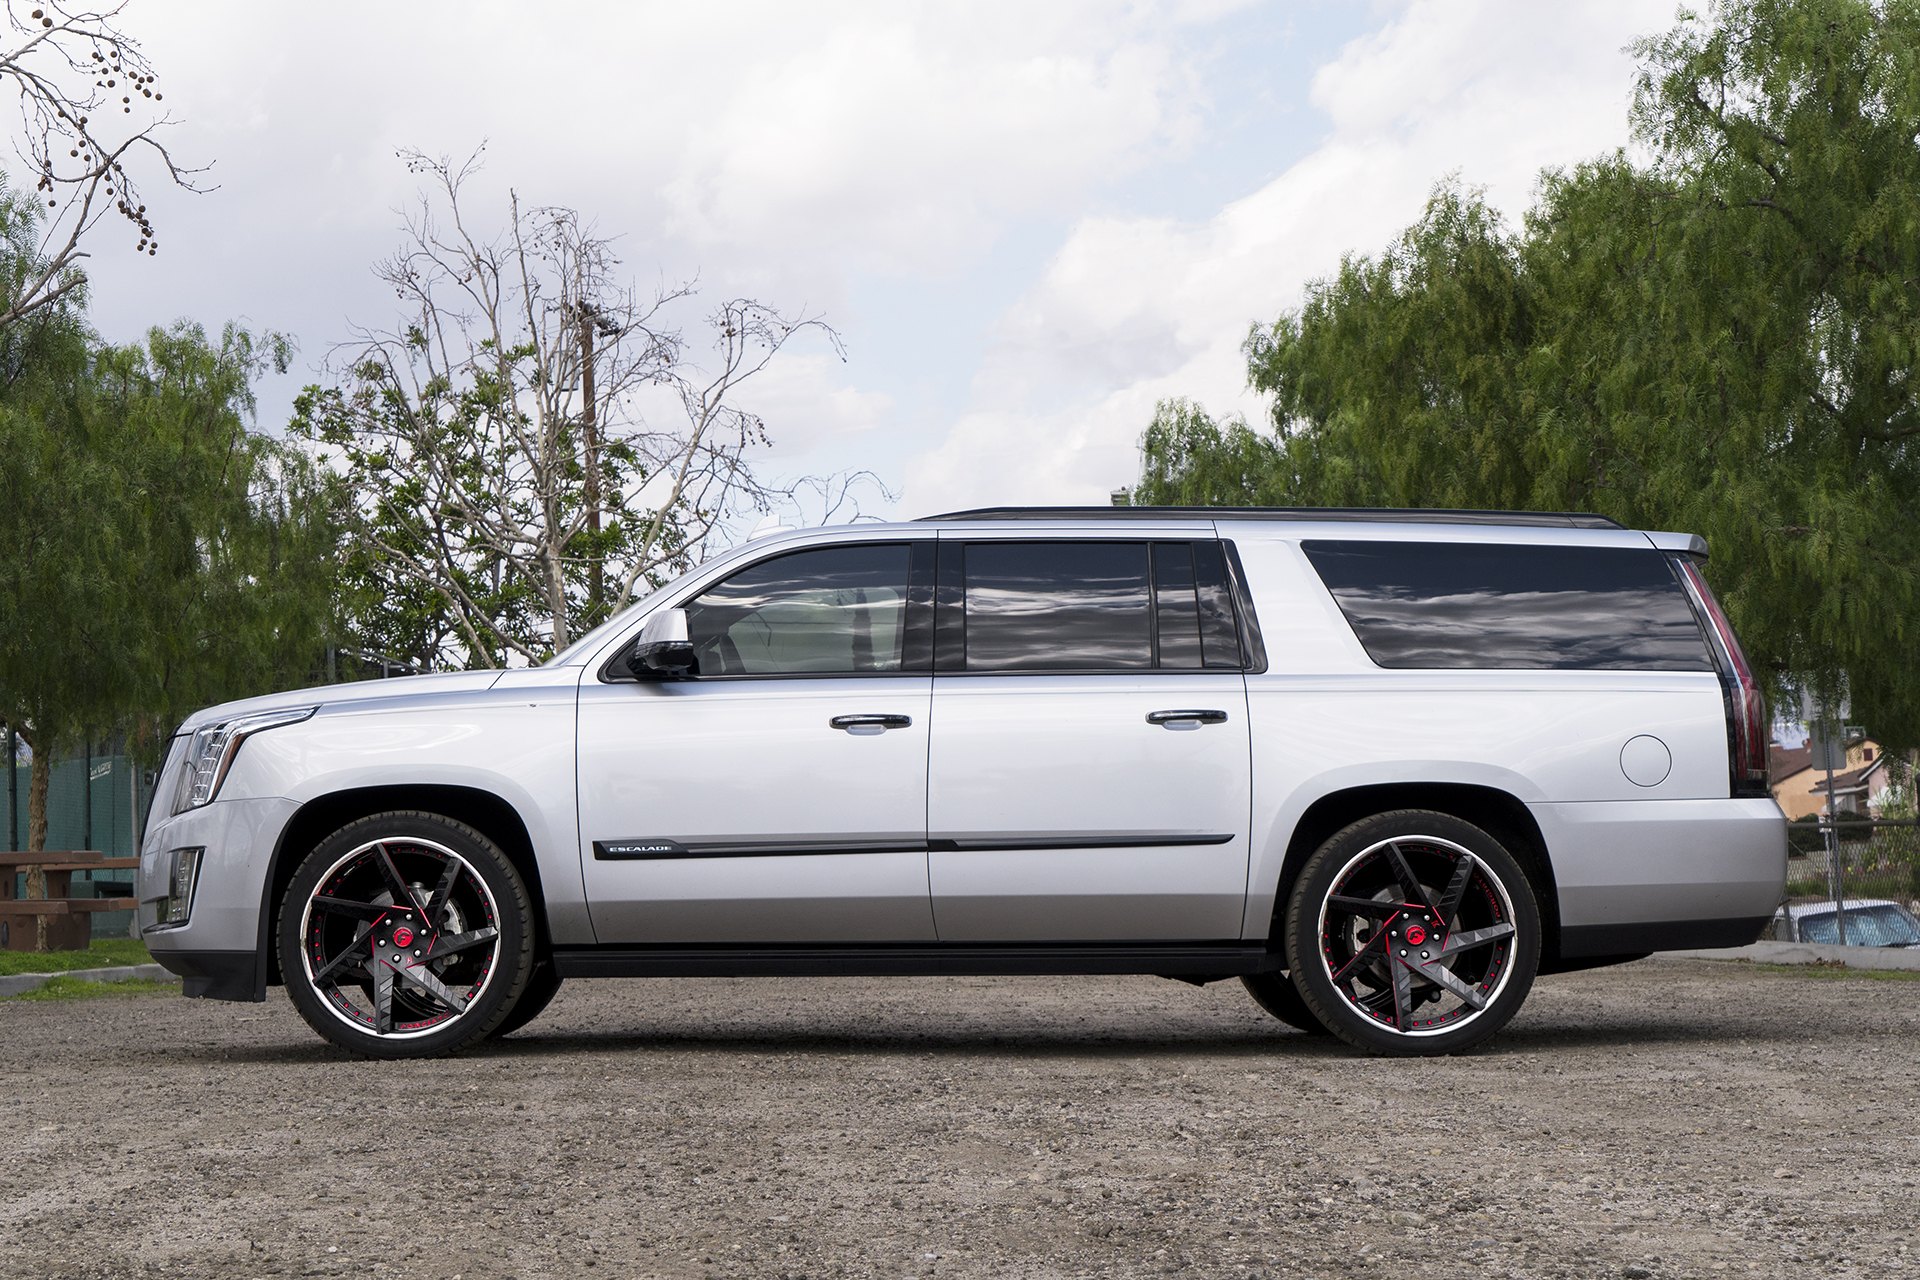 Gray Cadillac Escalade with Aftermarket Running Boards - Photo by Forgiato